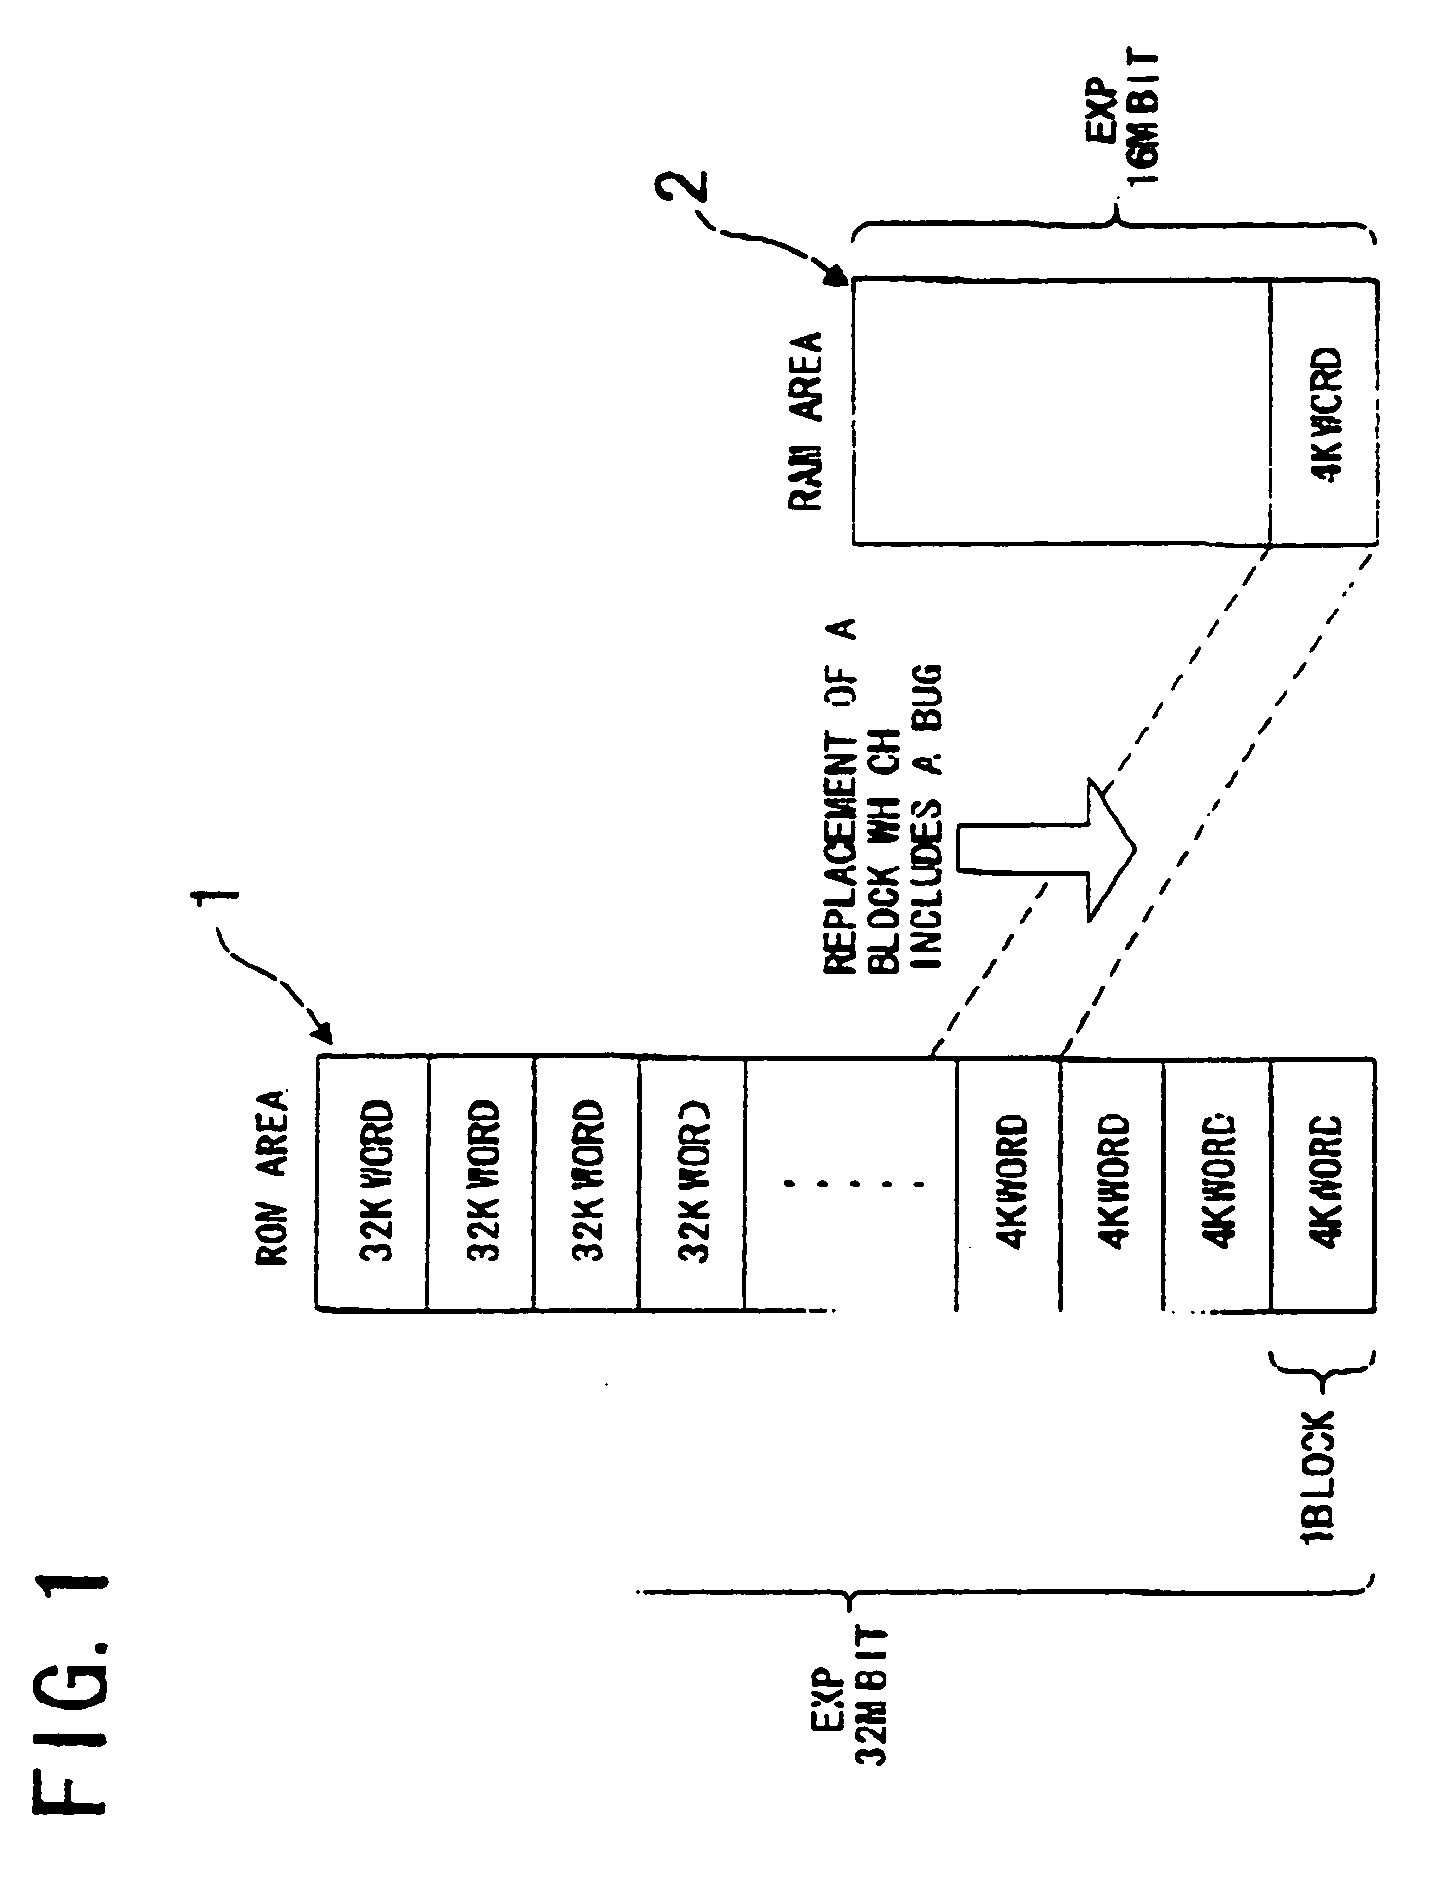 Program rewriting system and method for a portable telephone set